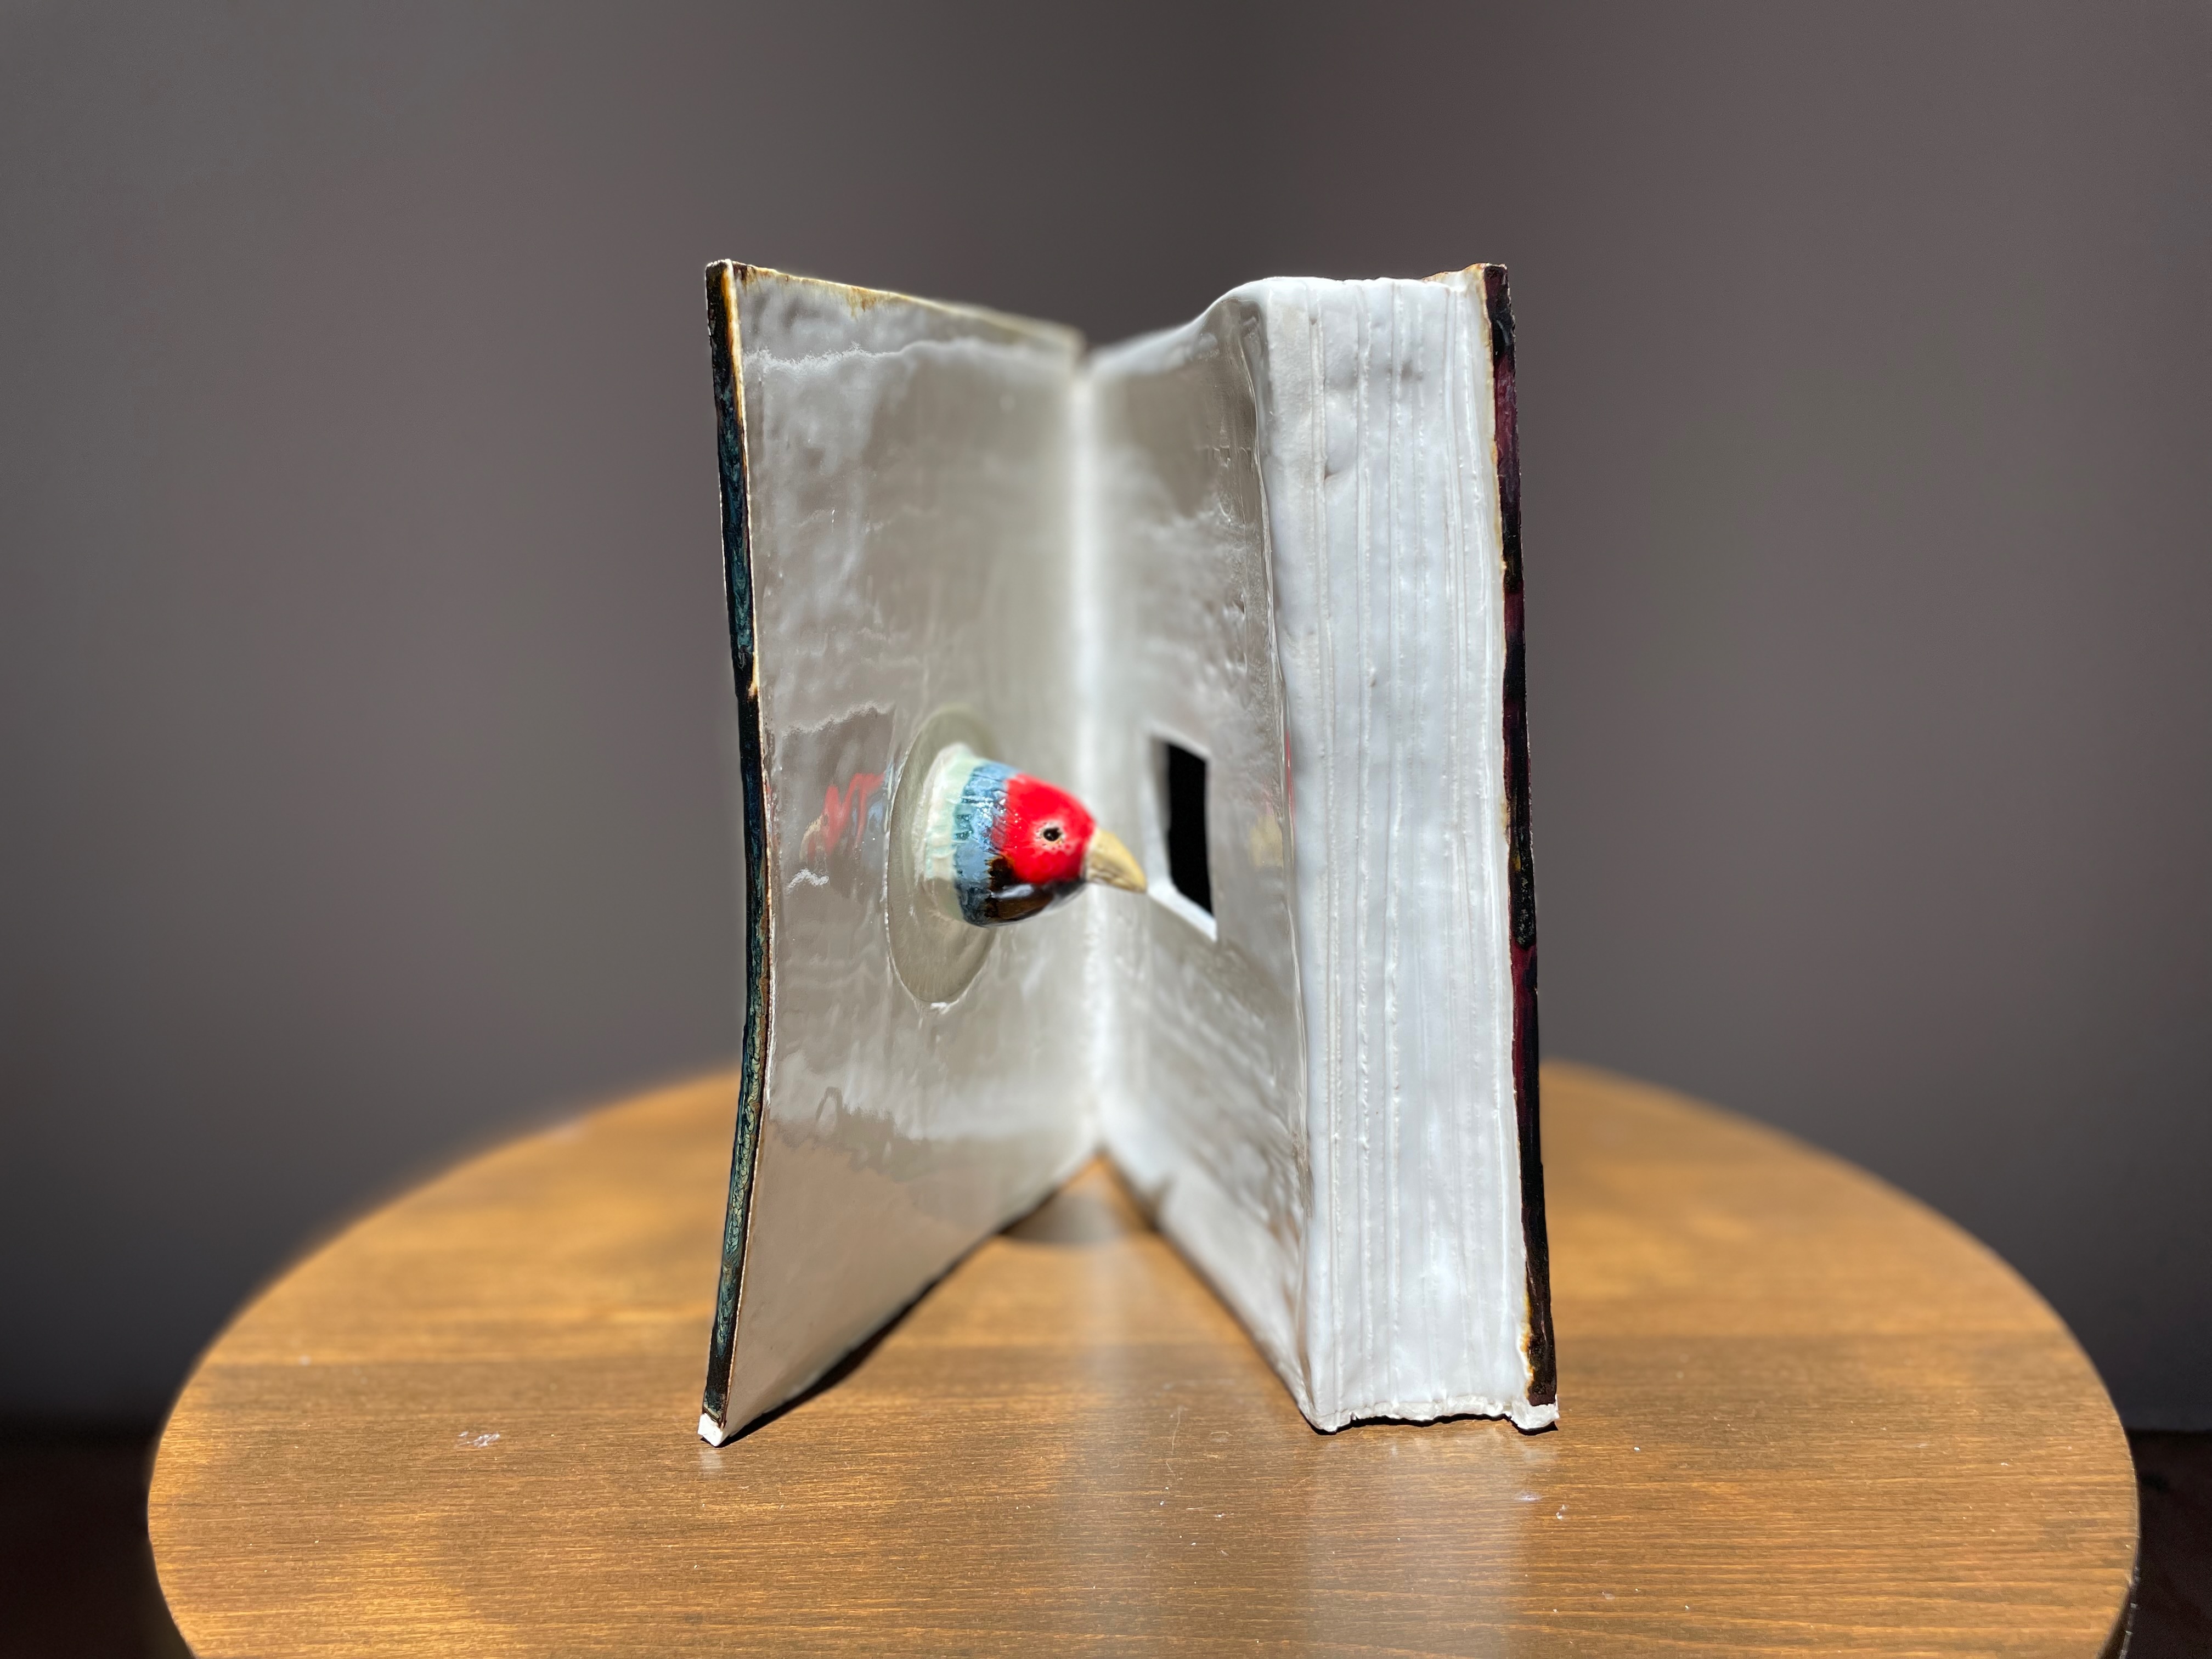 Dan Nuttall's ceramic sculpture of a book titled "Dominion" showing inside of book cover with emerging bird